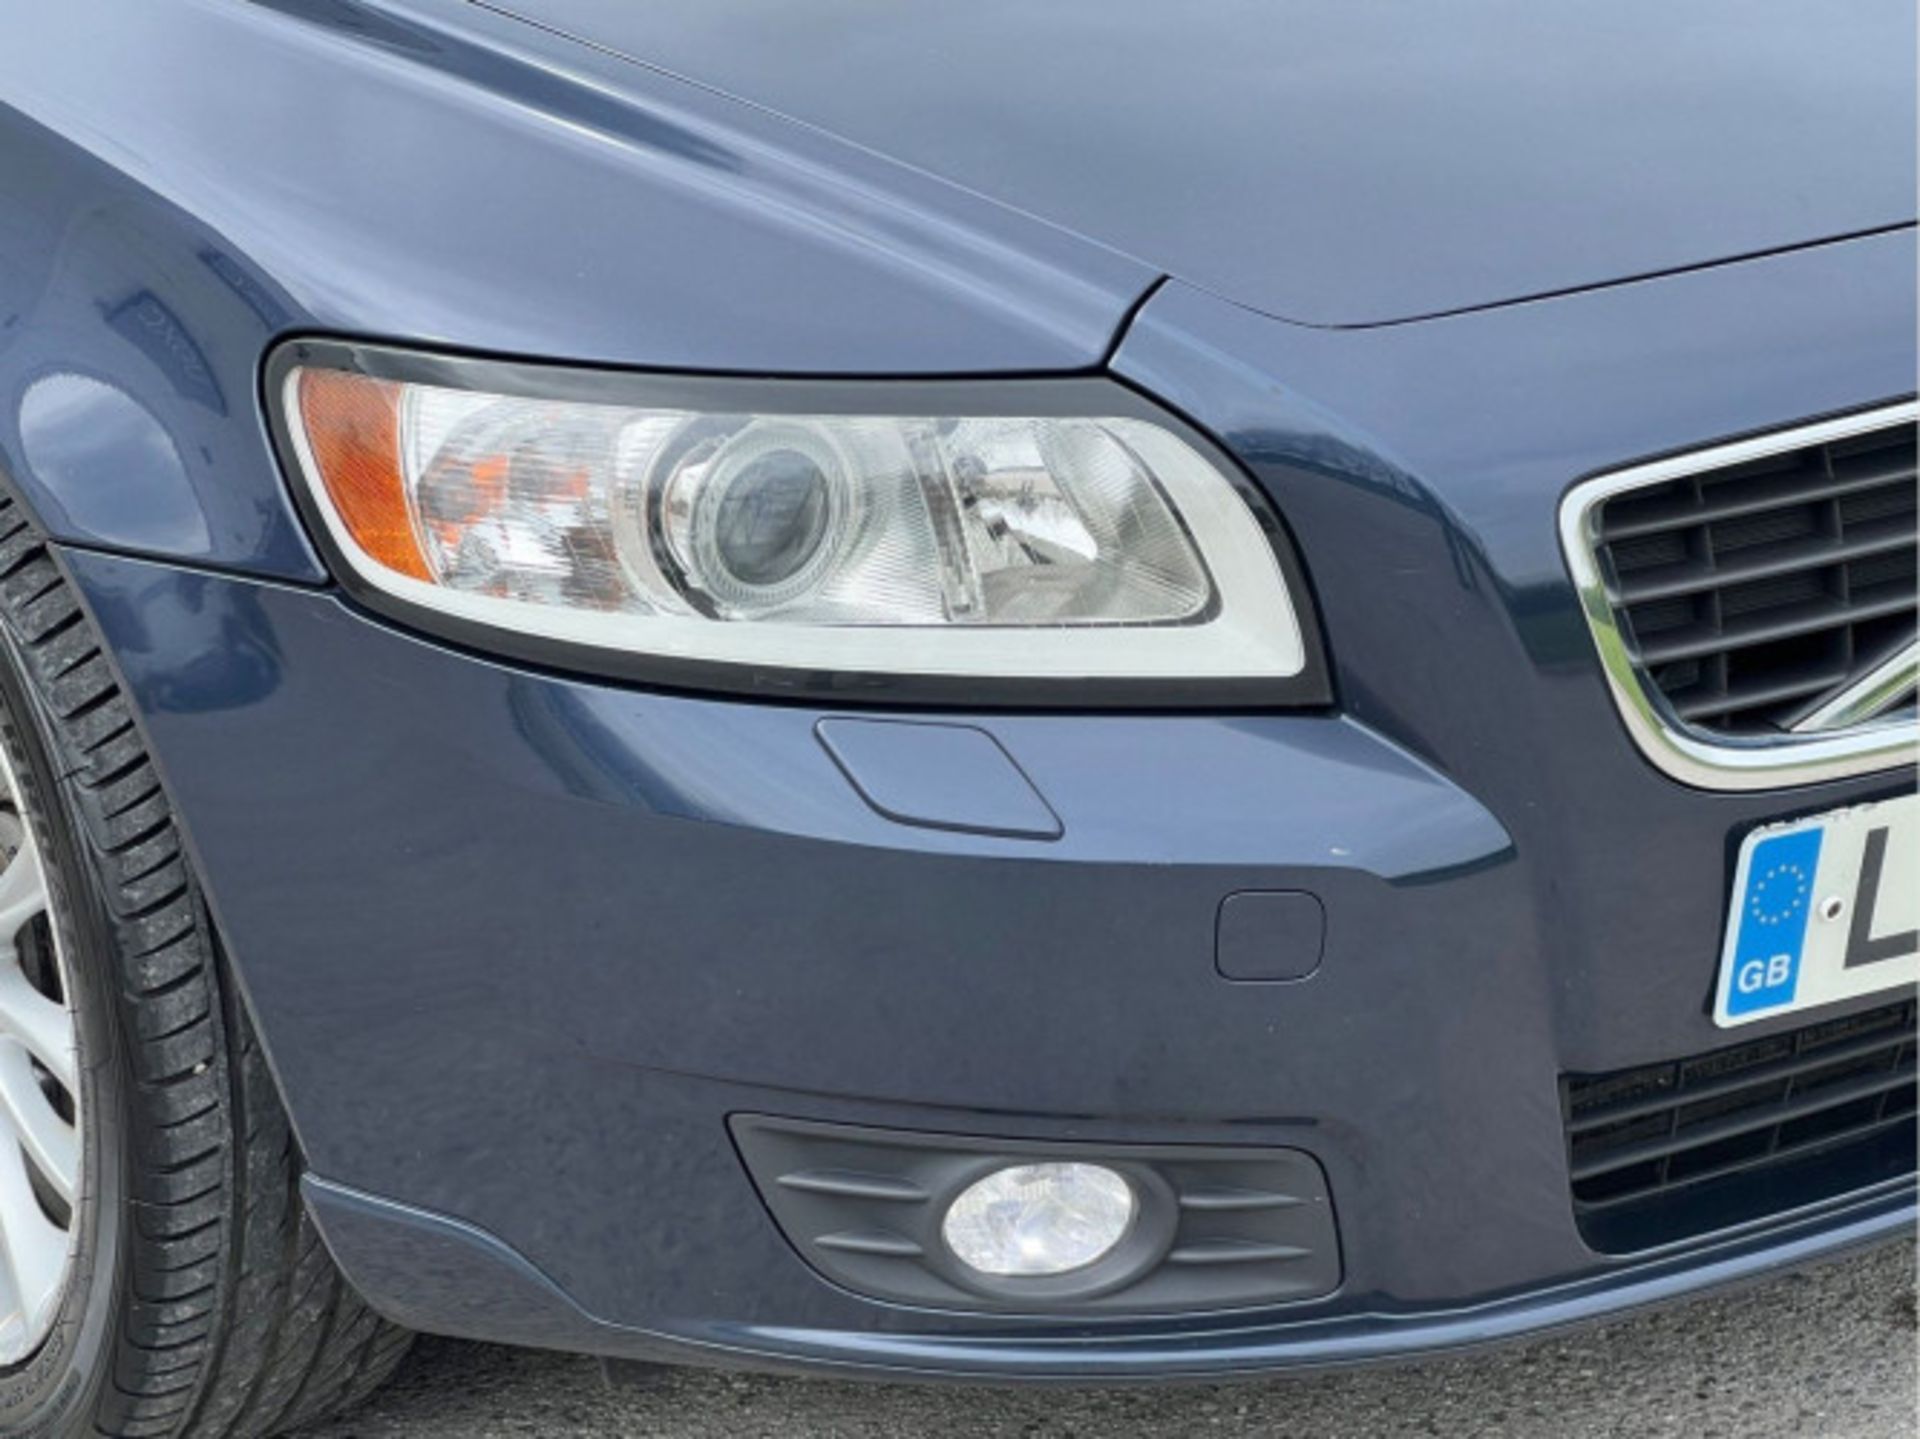 VOLVO V50 1.6D DRIVE SE LUX EDITION EURO 5 (S/S) 5DR (2012) - Image 11 of 88